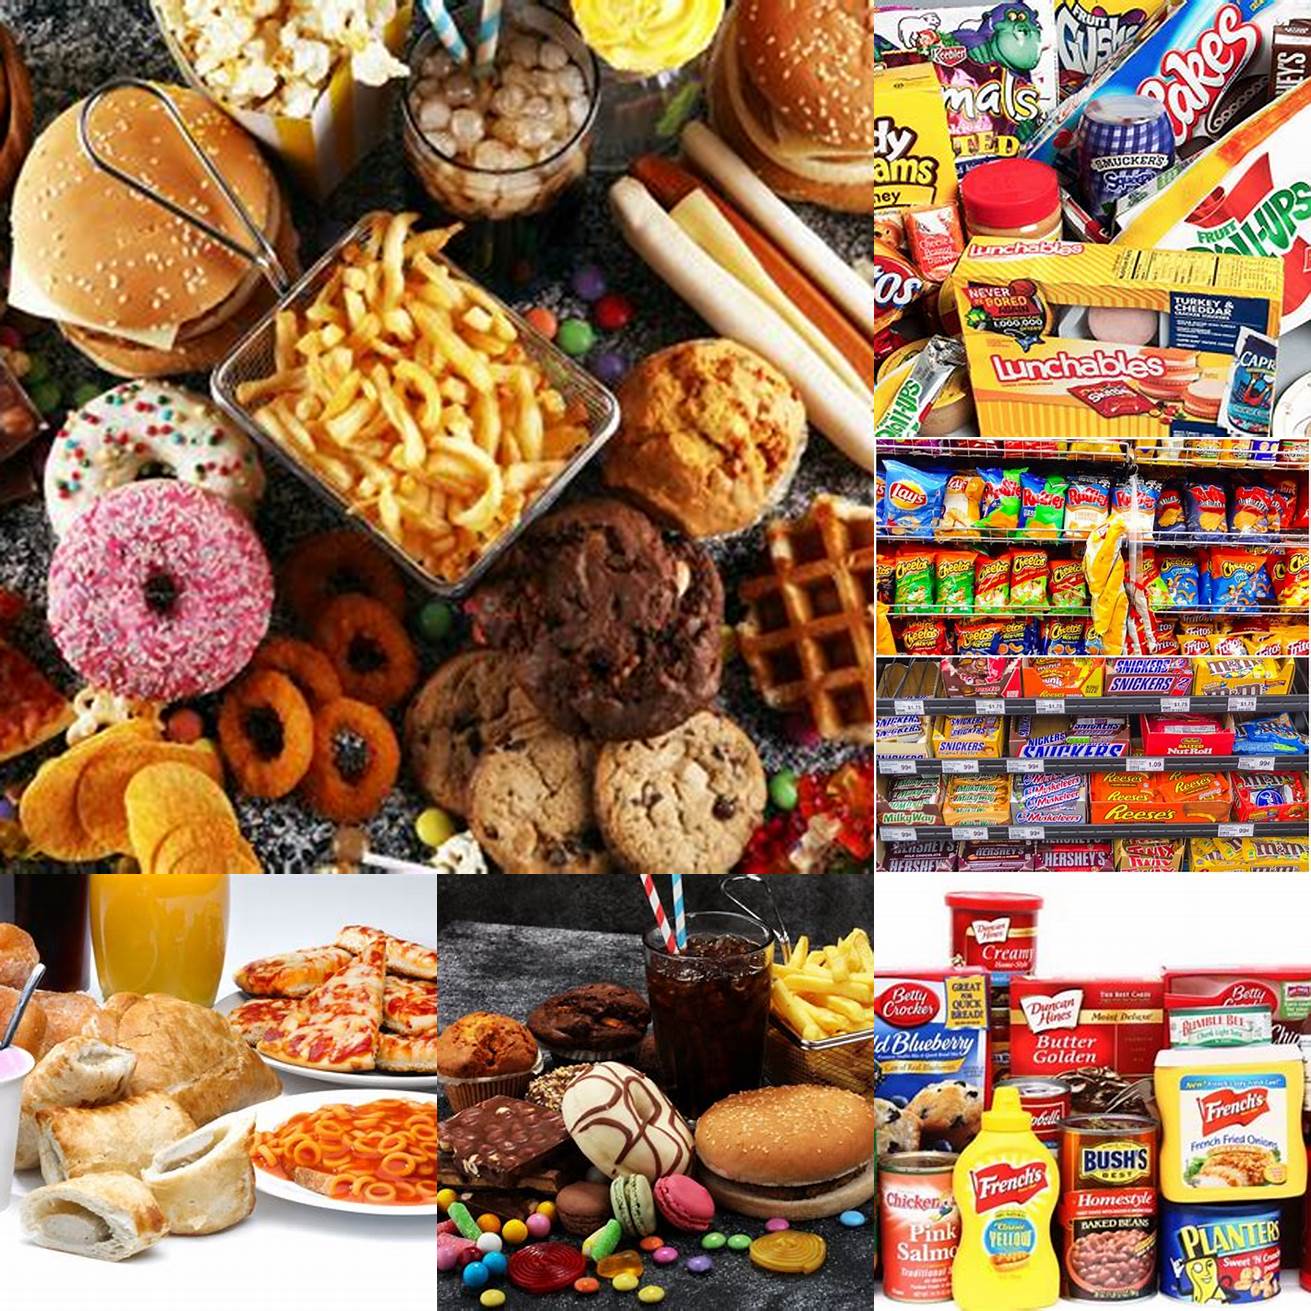 Processed Many American foods such as fast food and packaged snacks are highly processed and contain additives and preservatives